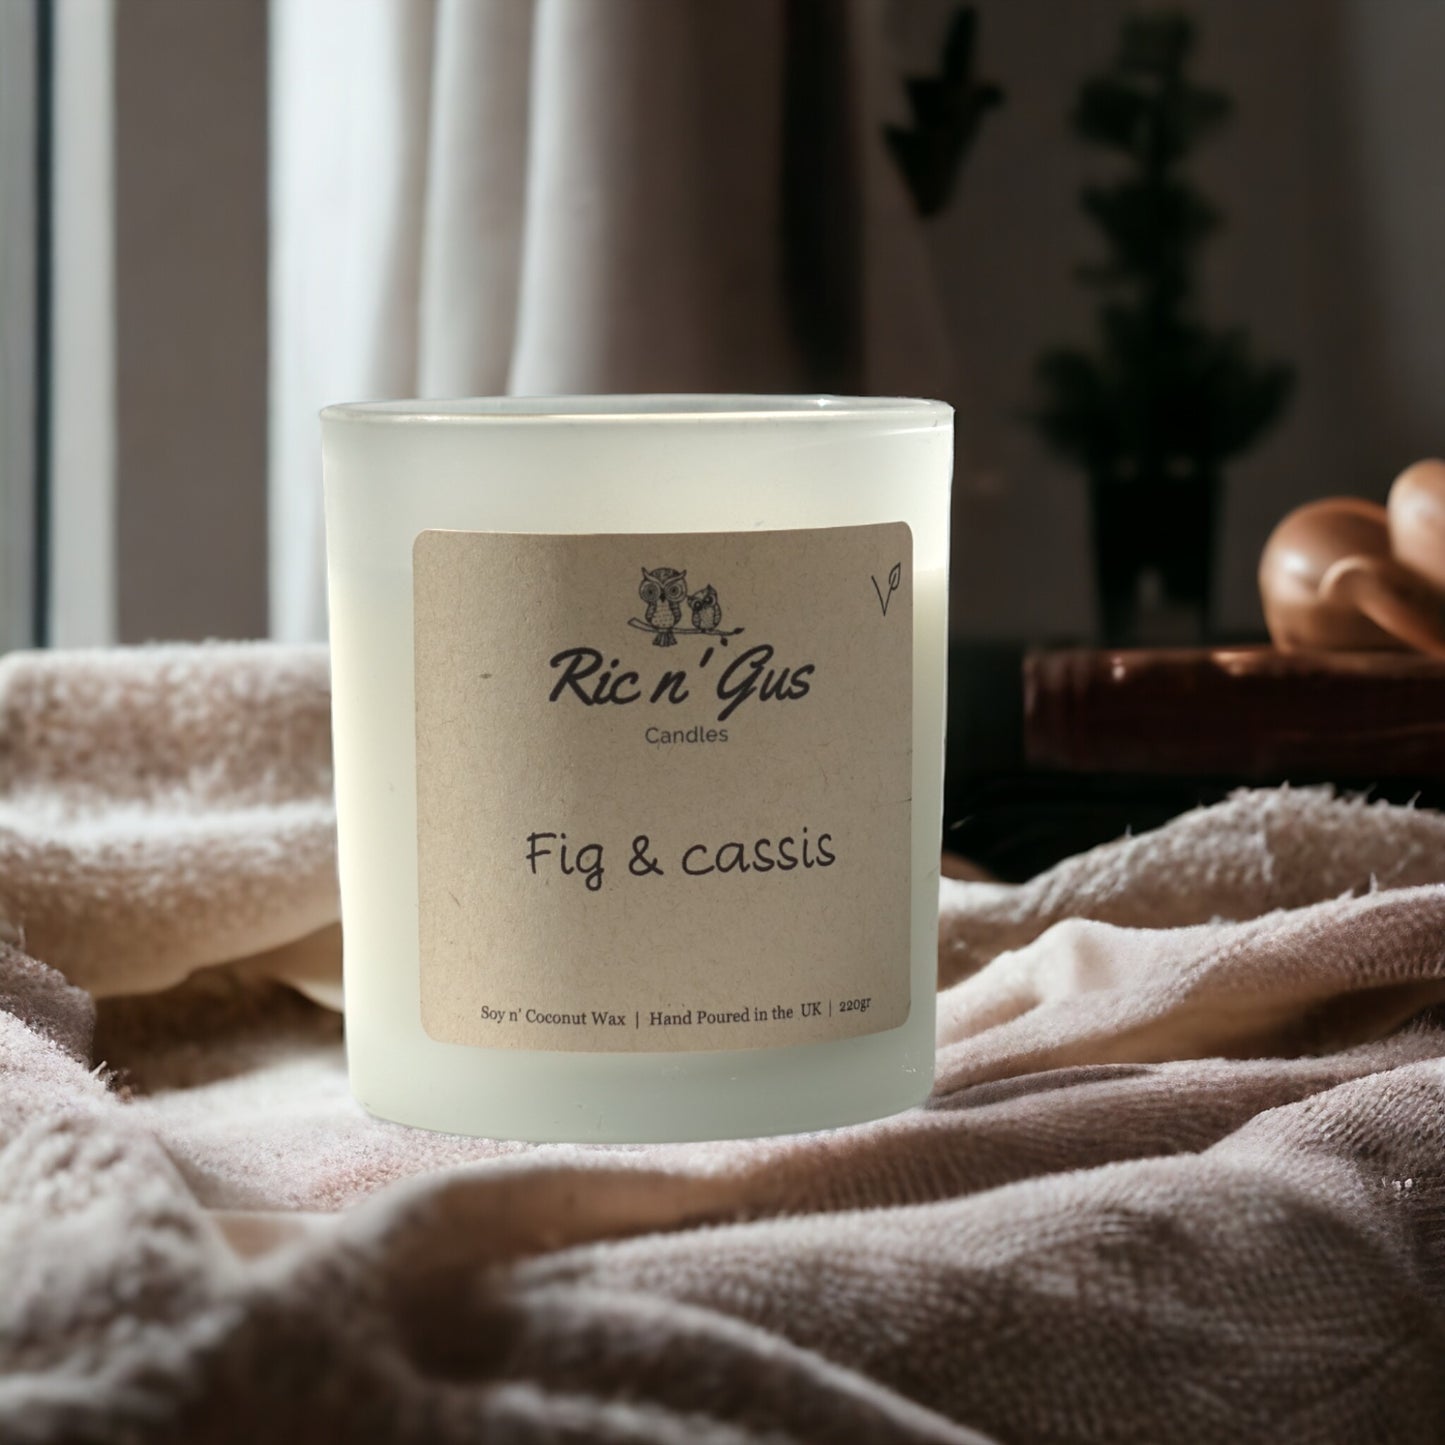 luxurious premium Fig & Cassis Candle - Soy & Coconut Wax Ric n'Gus Candles